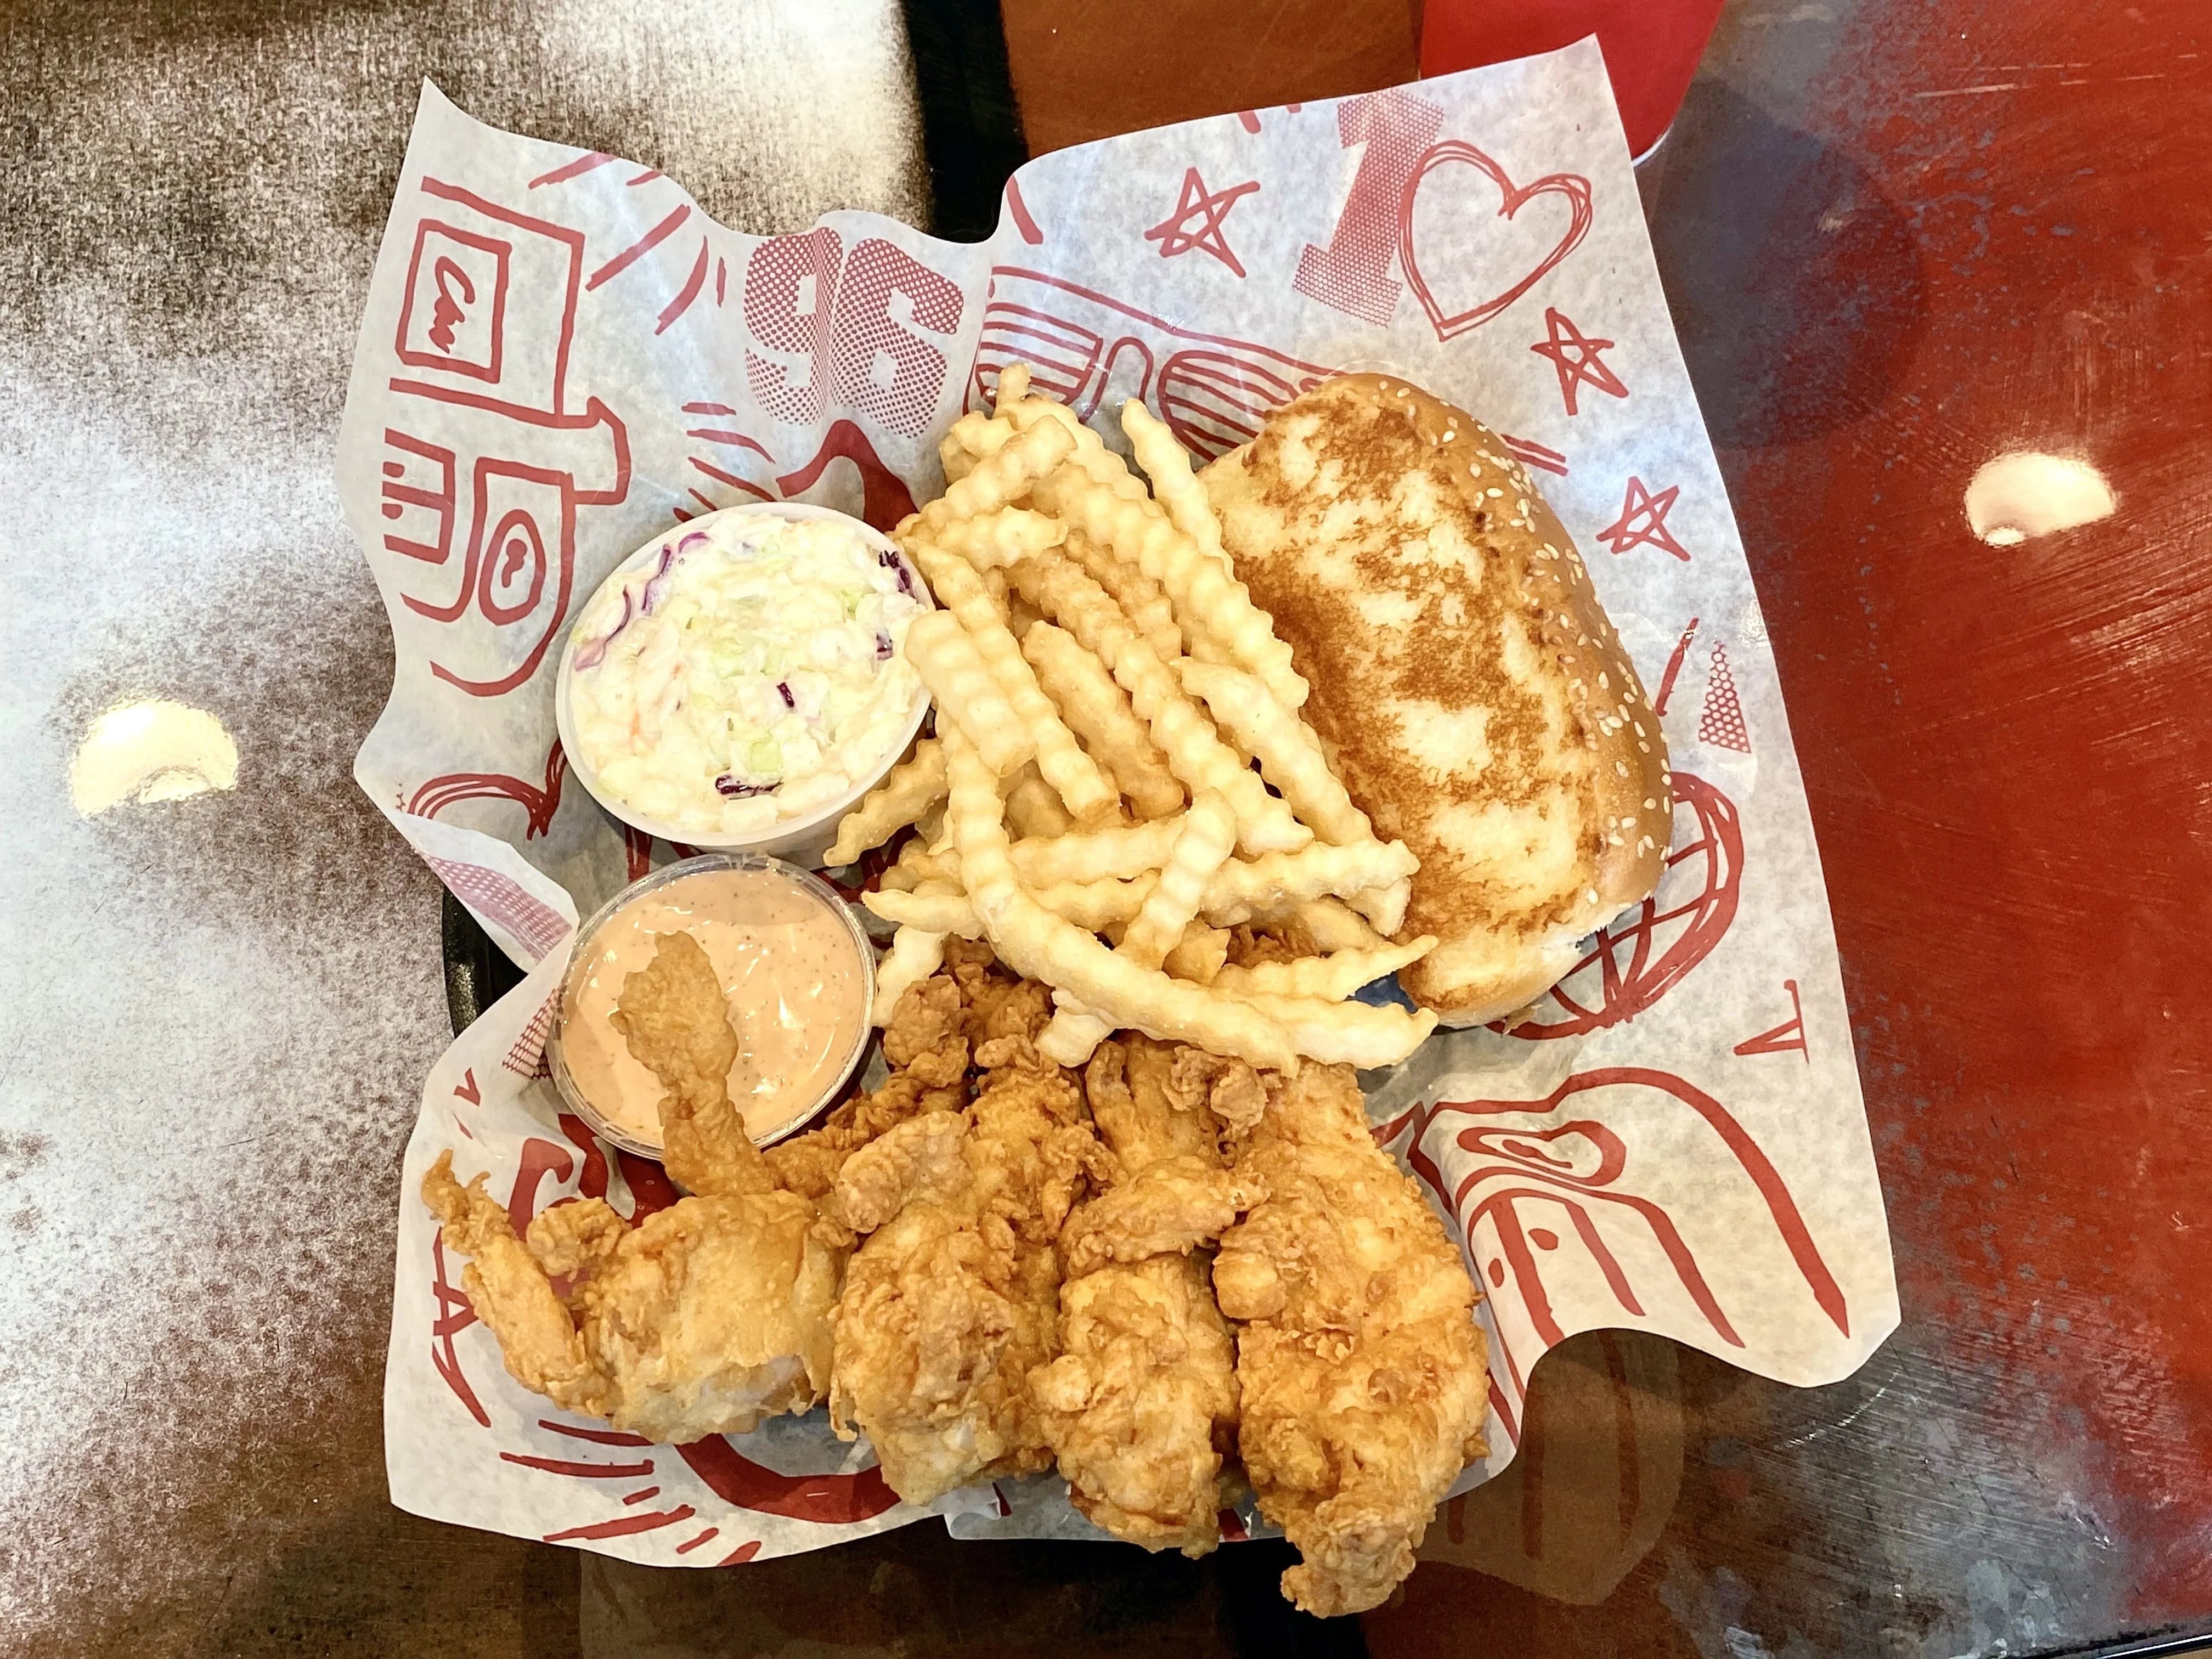 Raising Cane's to Open Southwest Philly Outpost This Summer